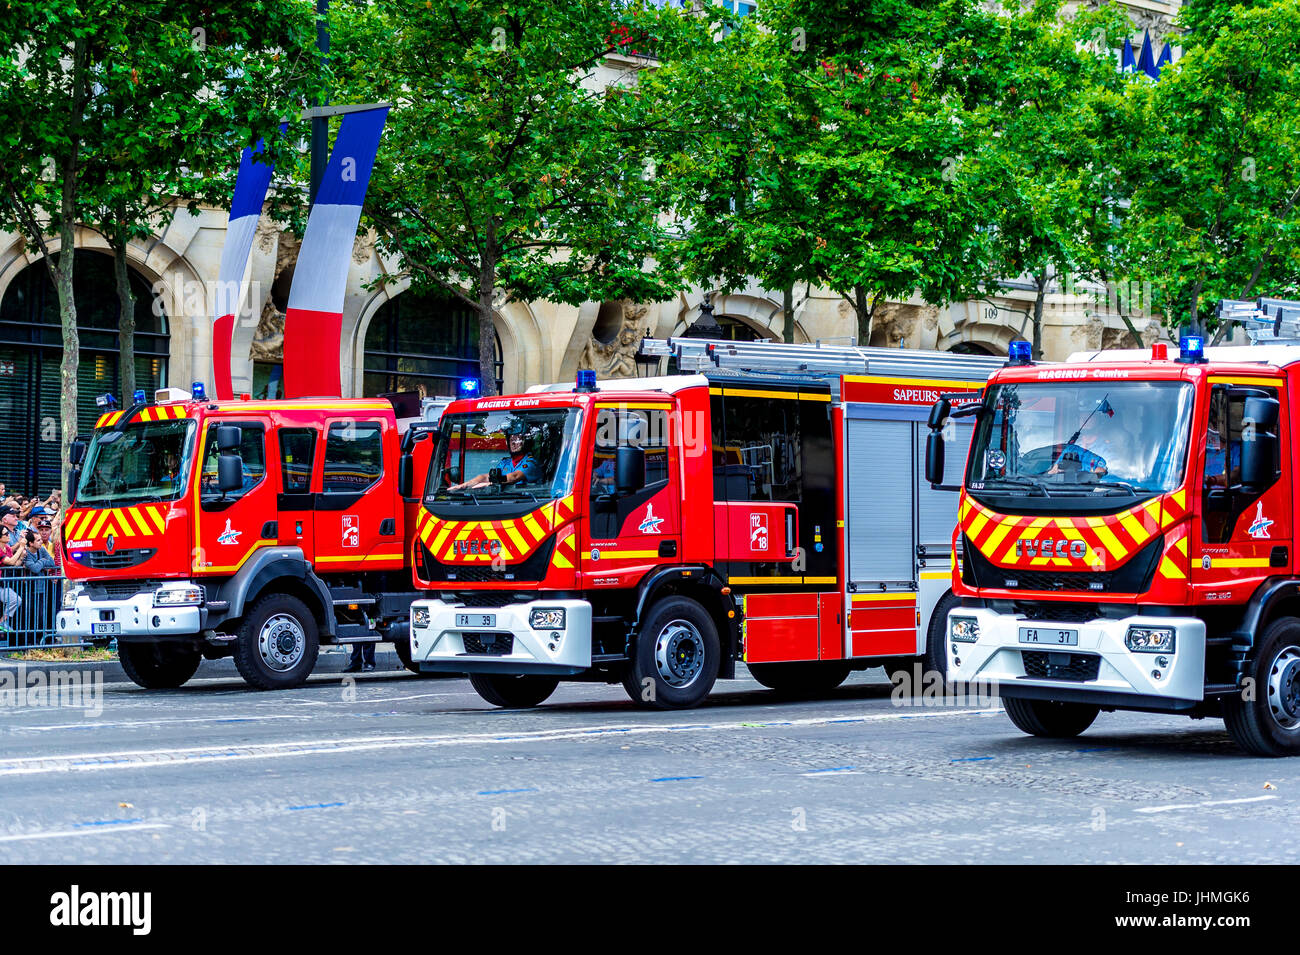 Paris, France. 14 Juy 17. French Military and Police put on a strong display on Bastille Day parade. Credit: Samantha Ohlsen/Alamy Live News Stock Photo